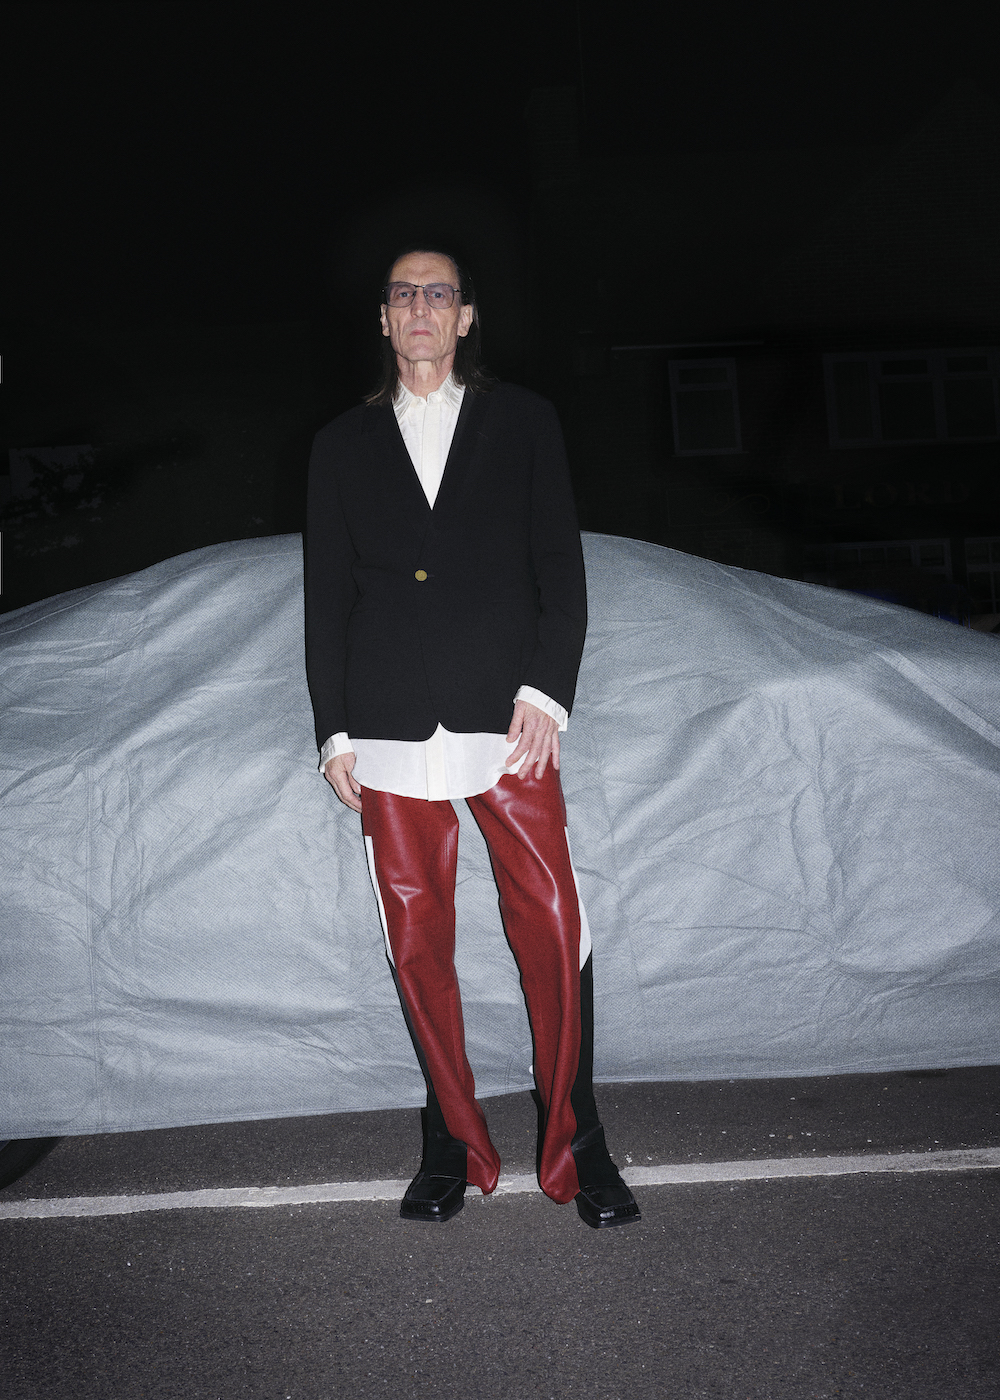 Jacket, shirt and trousers by DUNHILL, glasses by GENTLE MONSTER, shoes by MARTINE ROSE